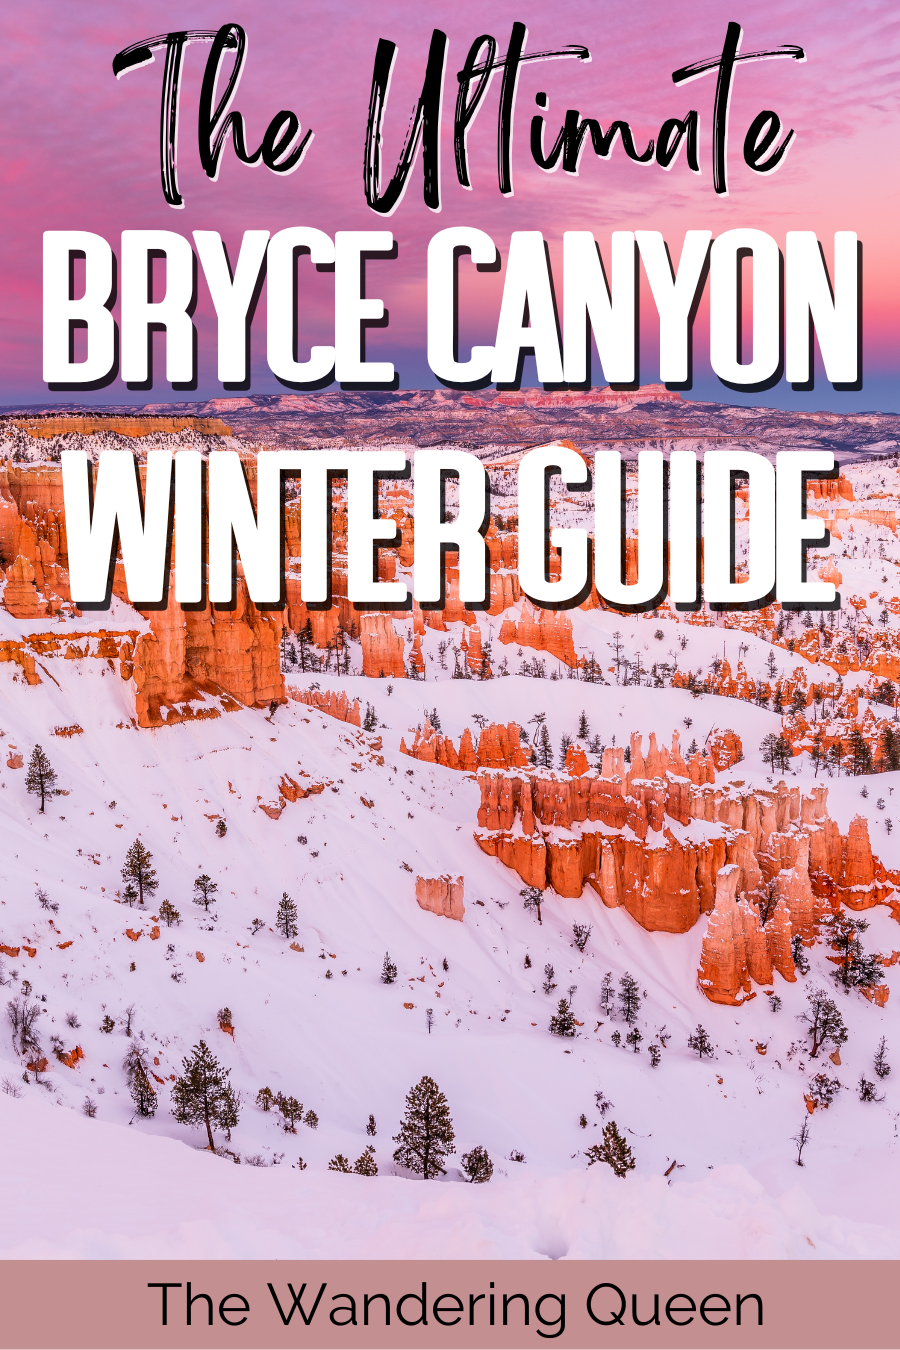 visit bryce canyon in winter